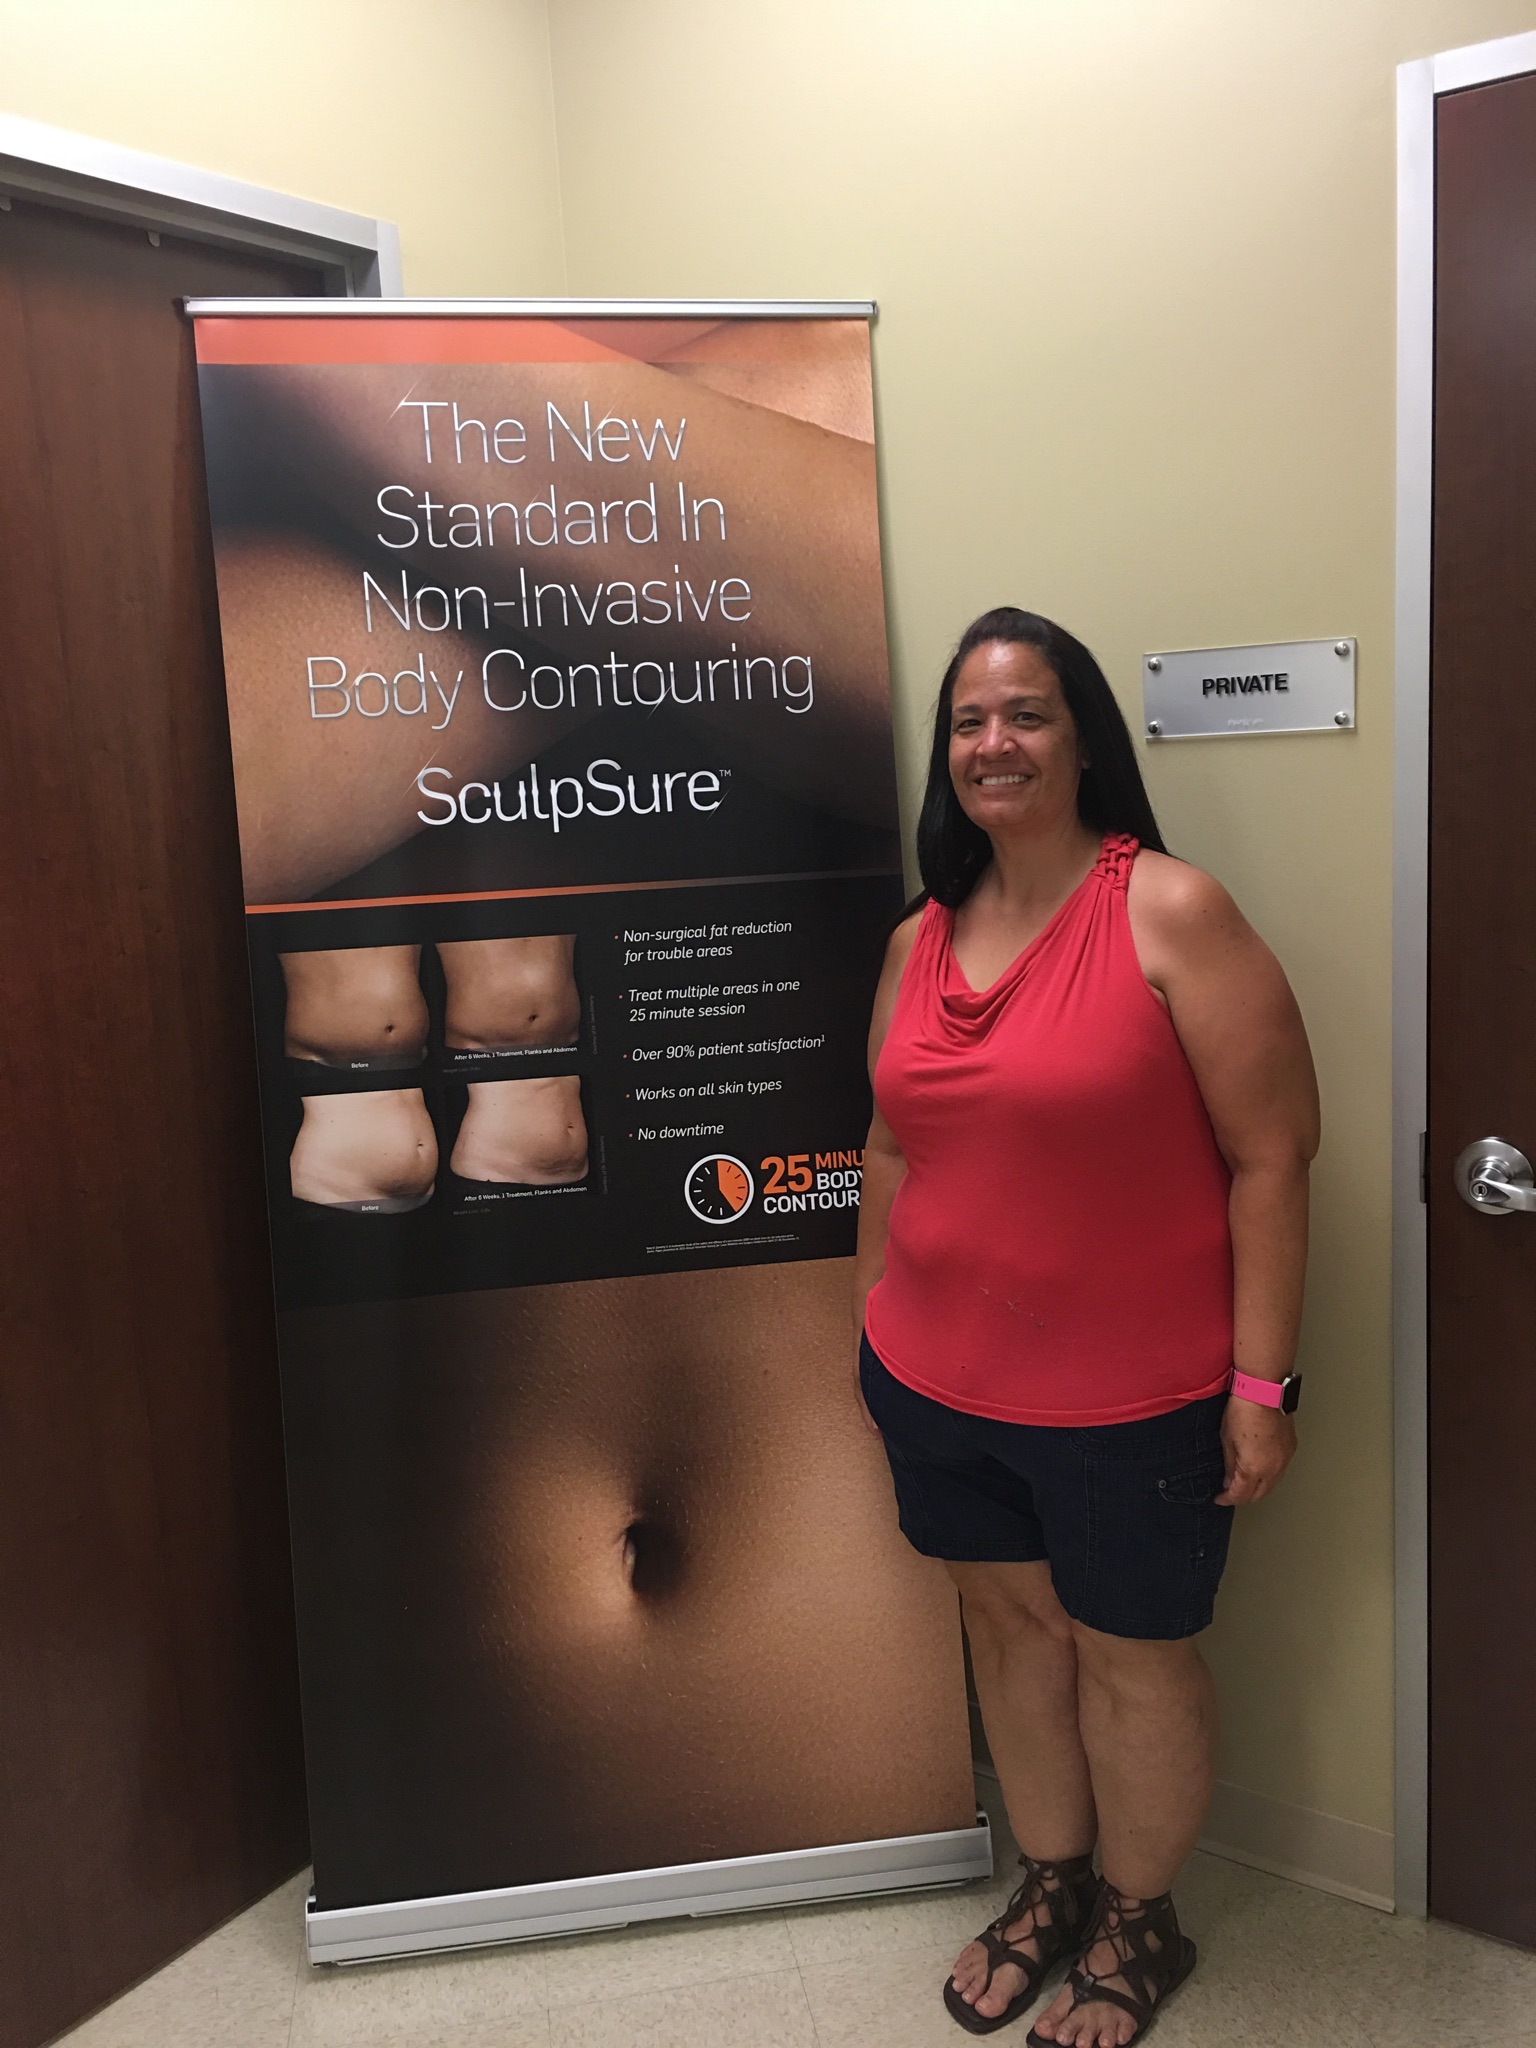 Free Sculpsure Treatment Given Away At Denison Event